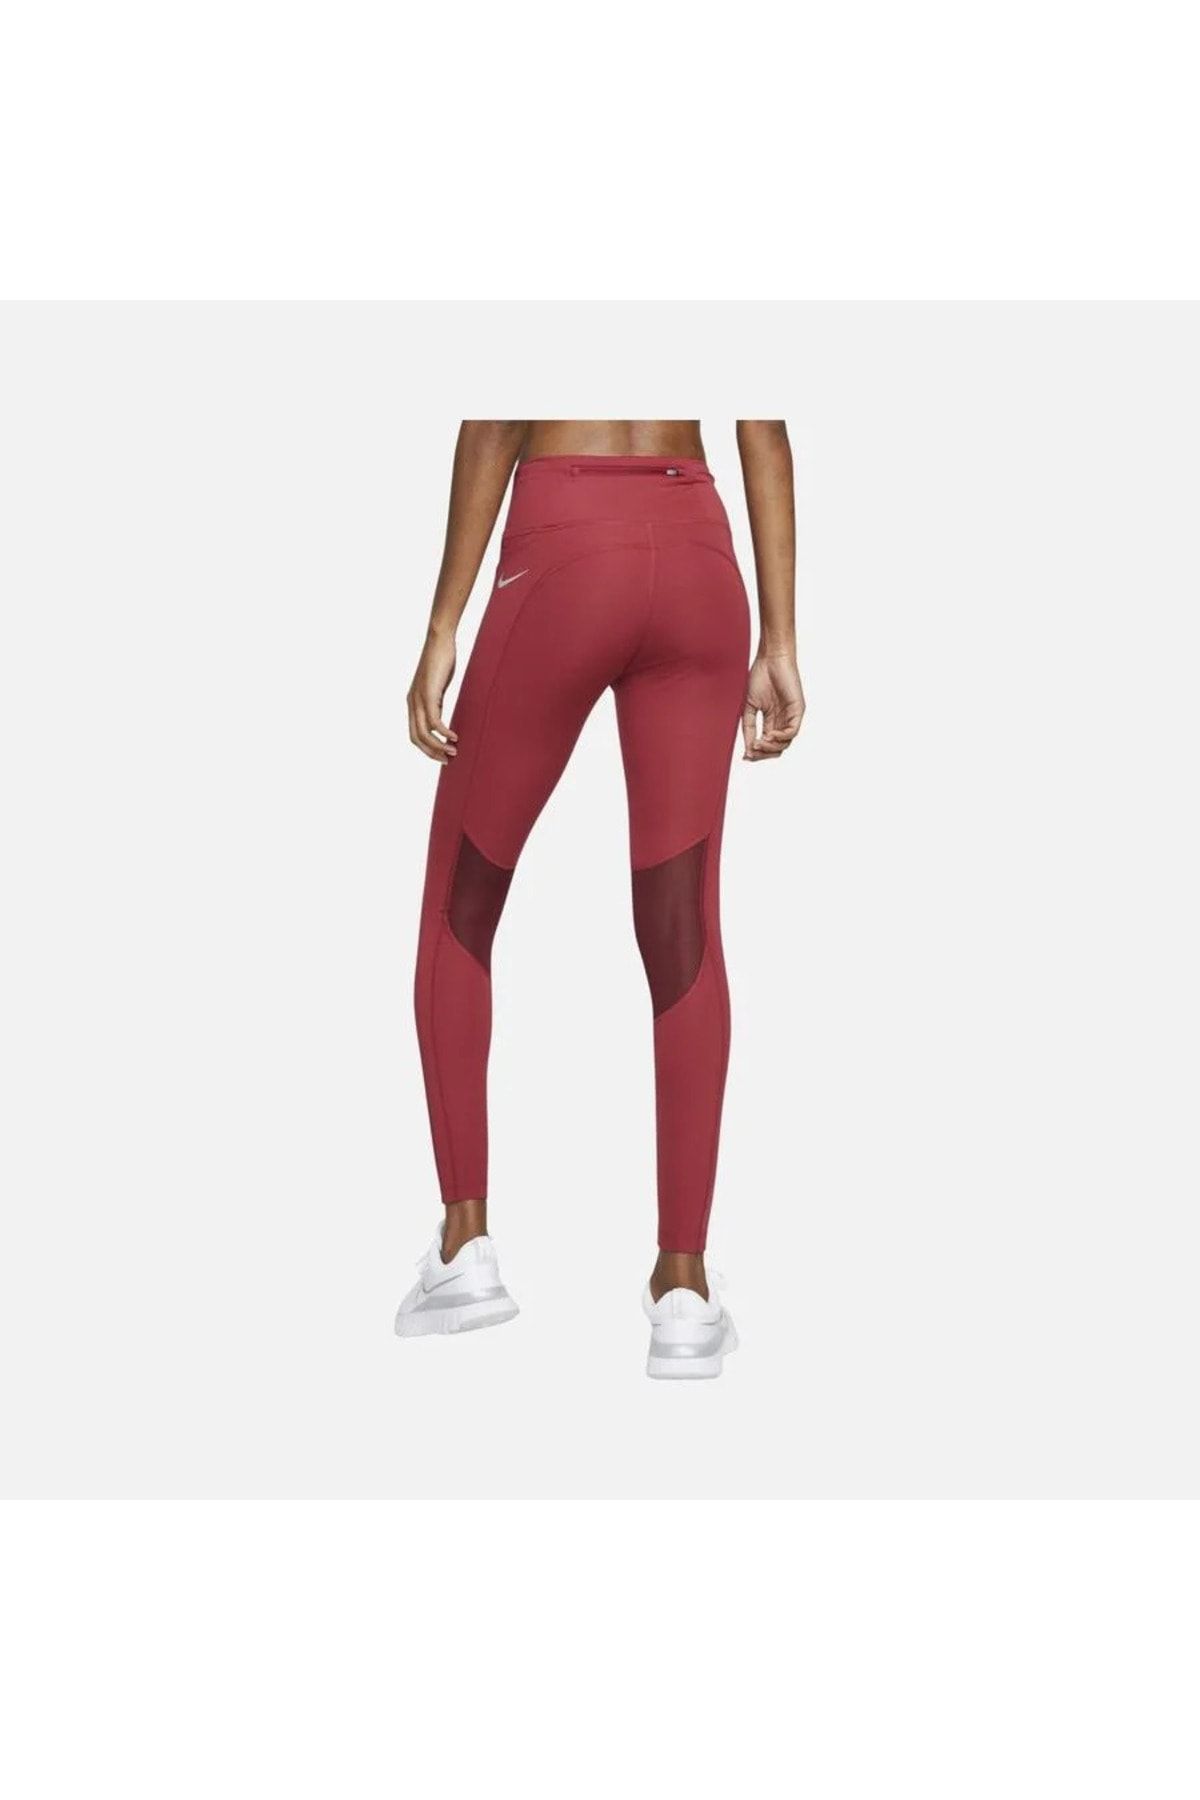 Nike Epic Fast Mid-Rise Running Women's Tights cz9240 - Trendyol